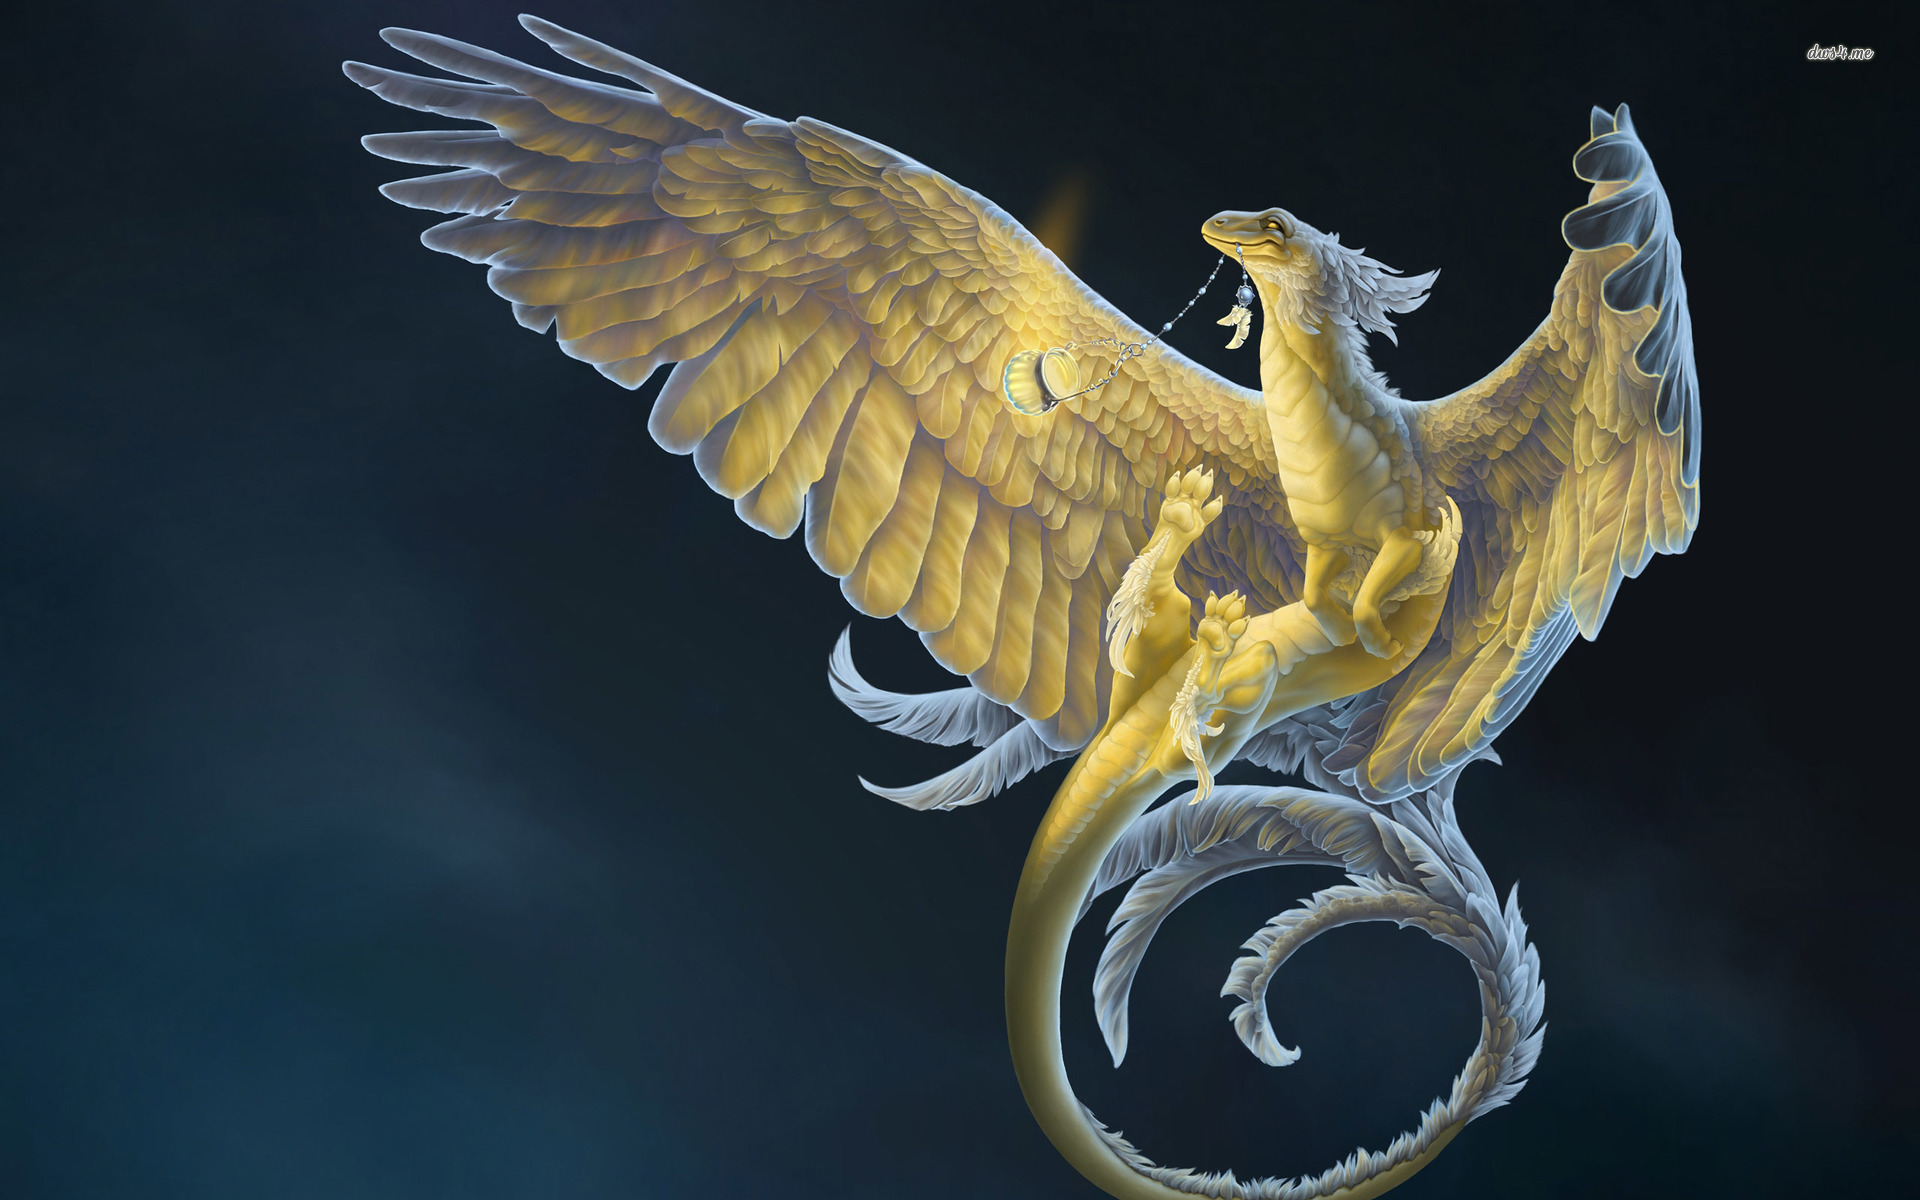 Dragon With Golden Feathers Wallpaper Fantasy